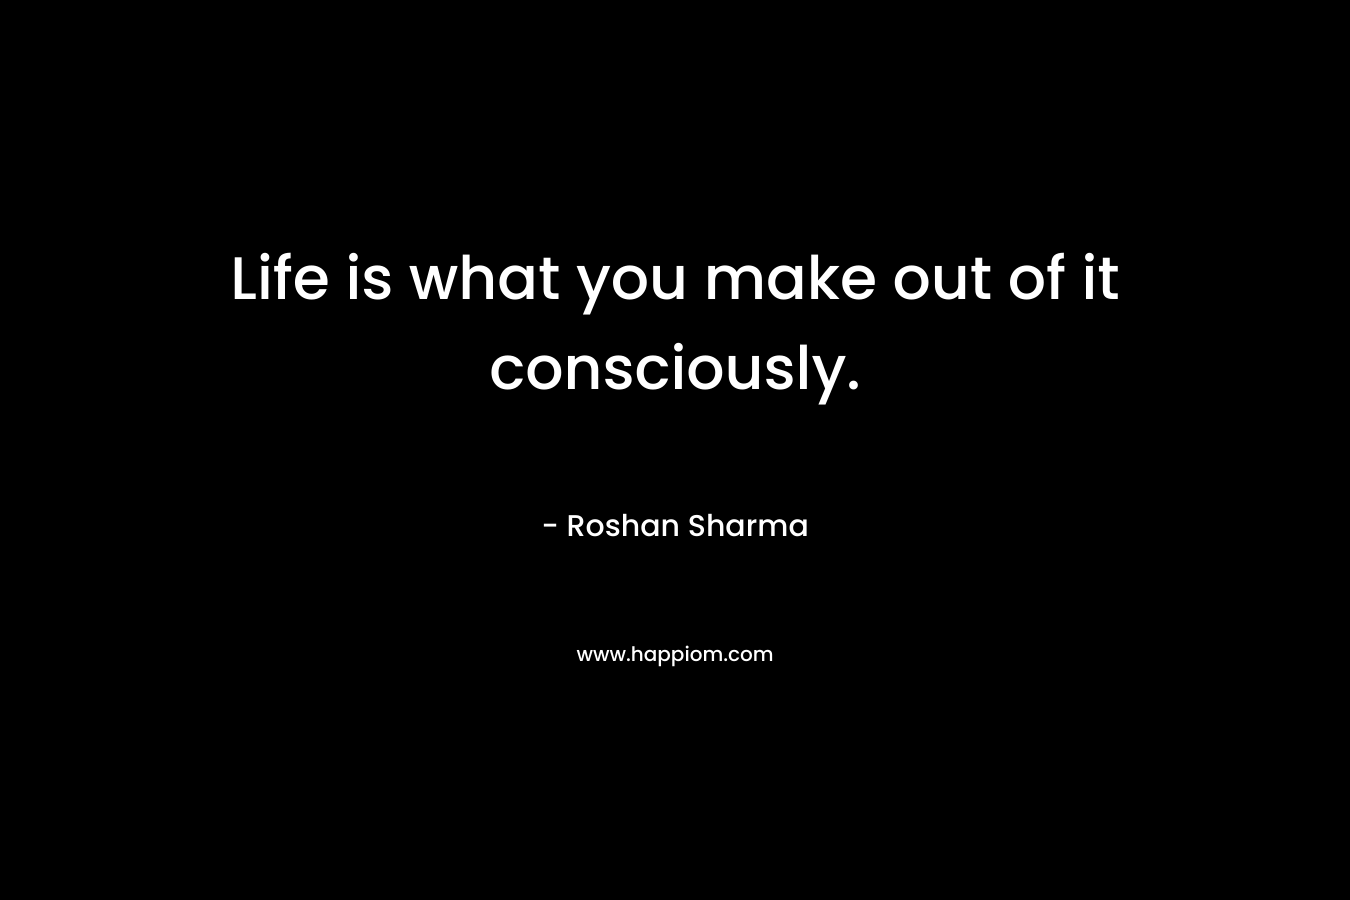 Life is what you make out of it consciously. – Roshan Sharma